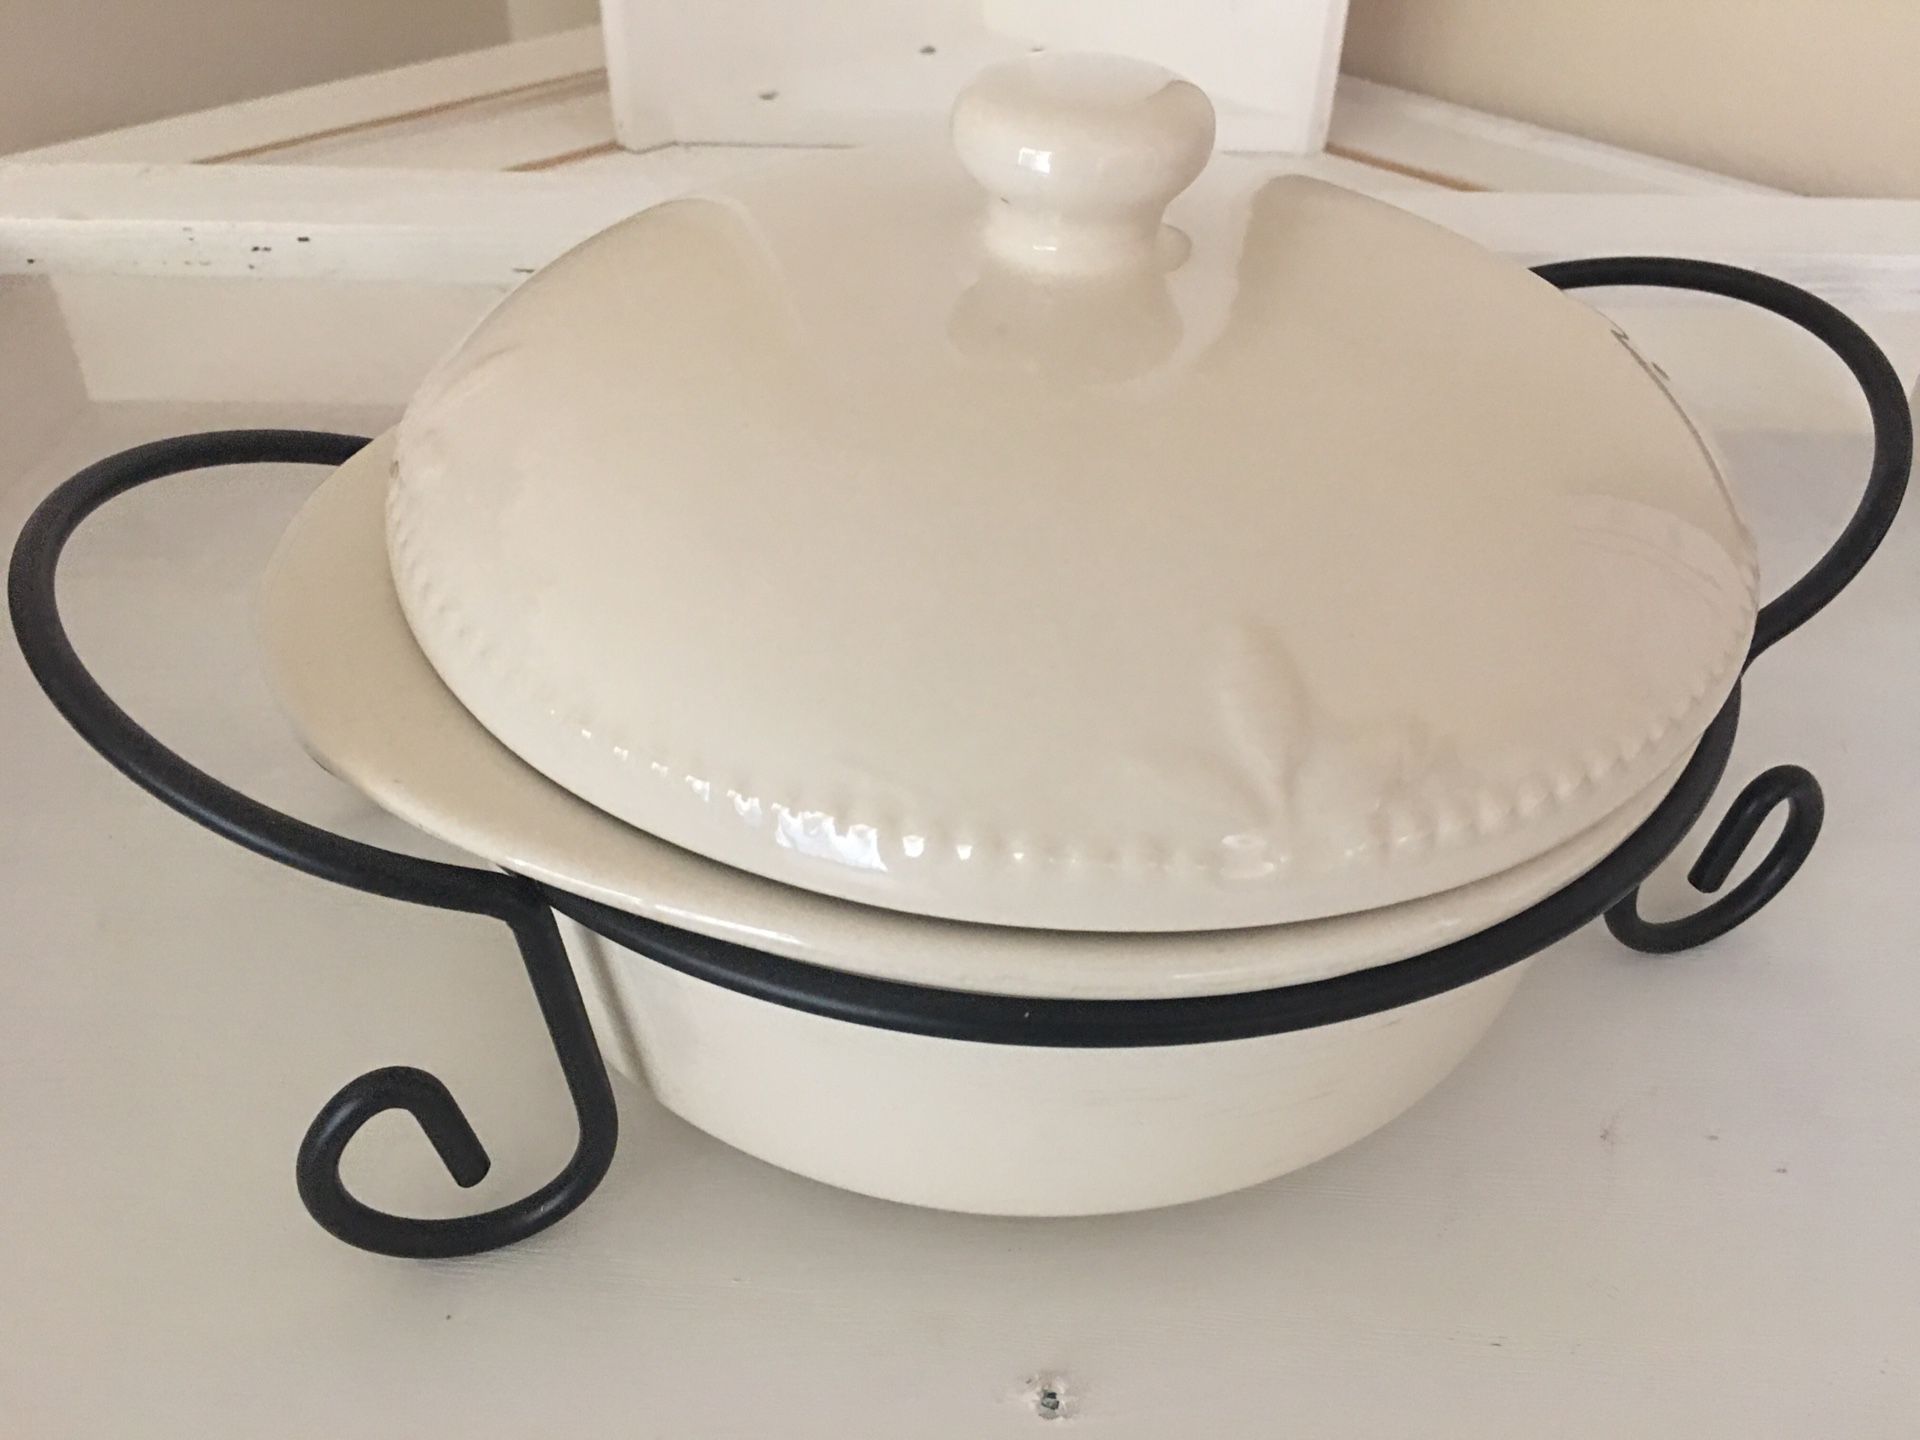 10” Round covered baker casserole dish with wire carry rack.